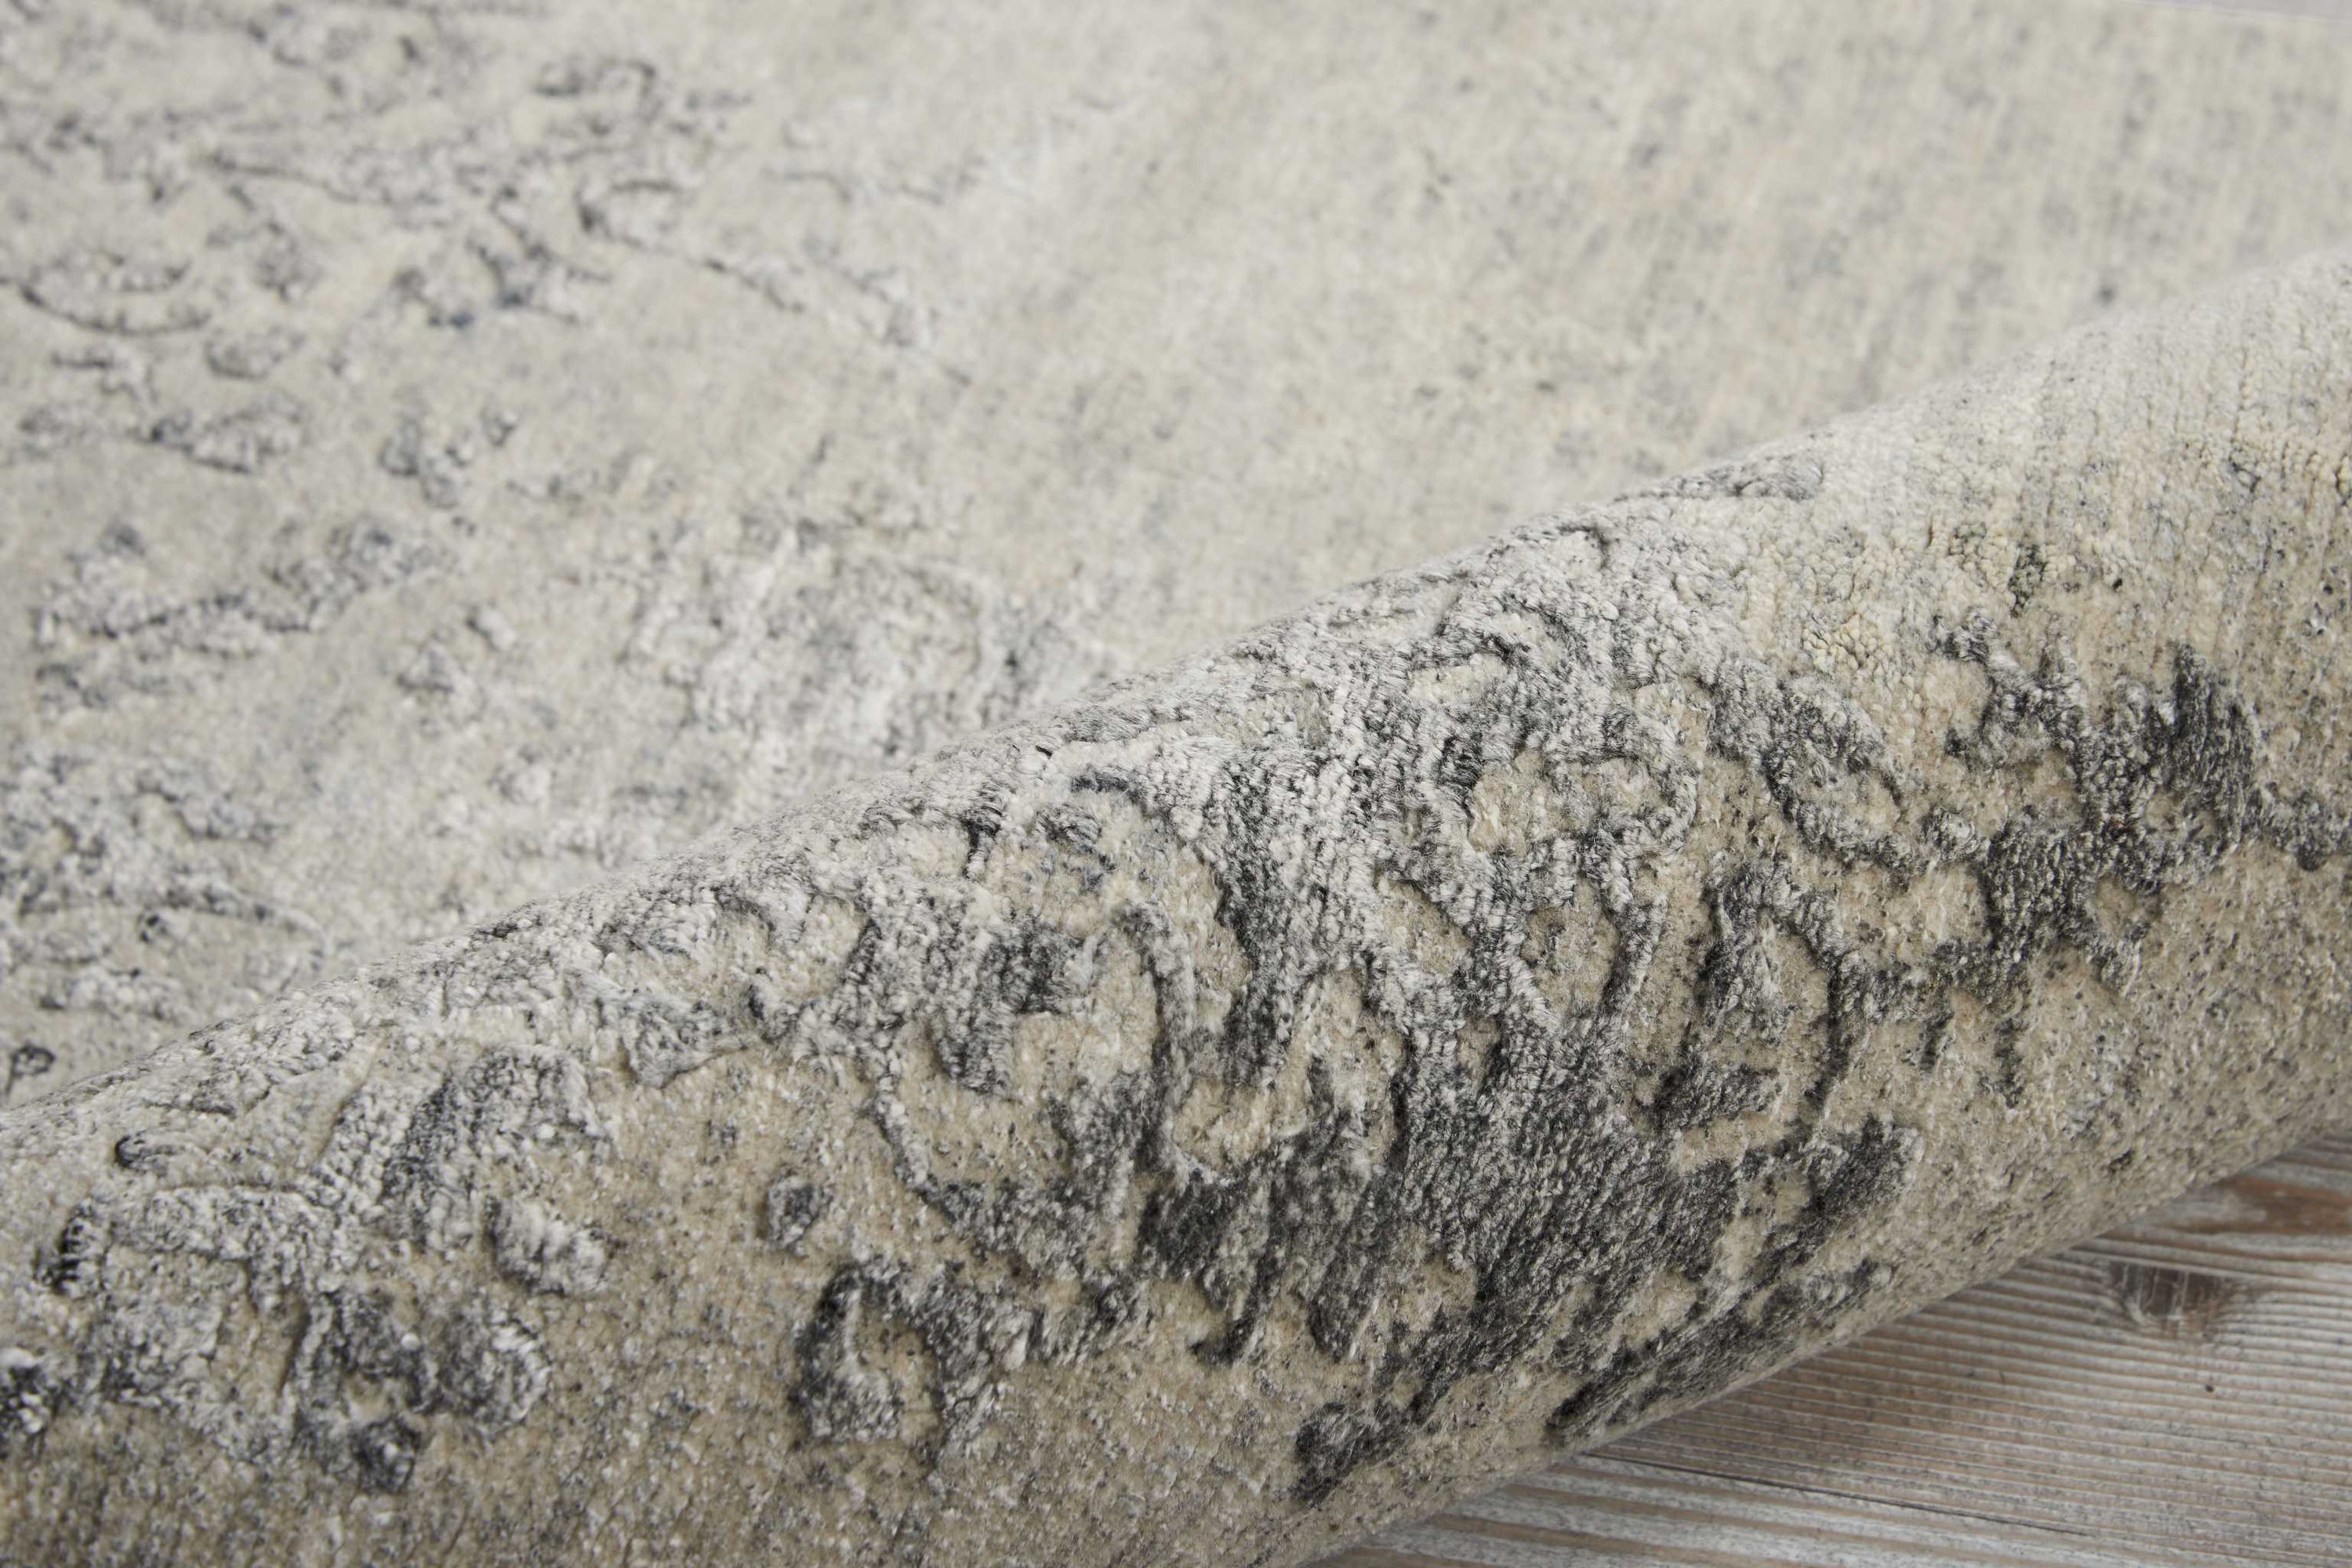 Close-up of a textured, cylindrical rug in black, grey, and white.